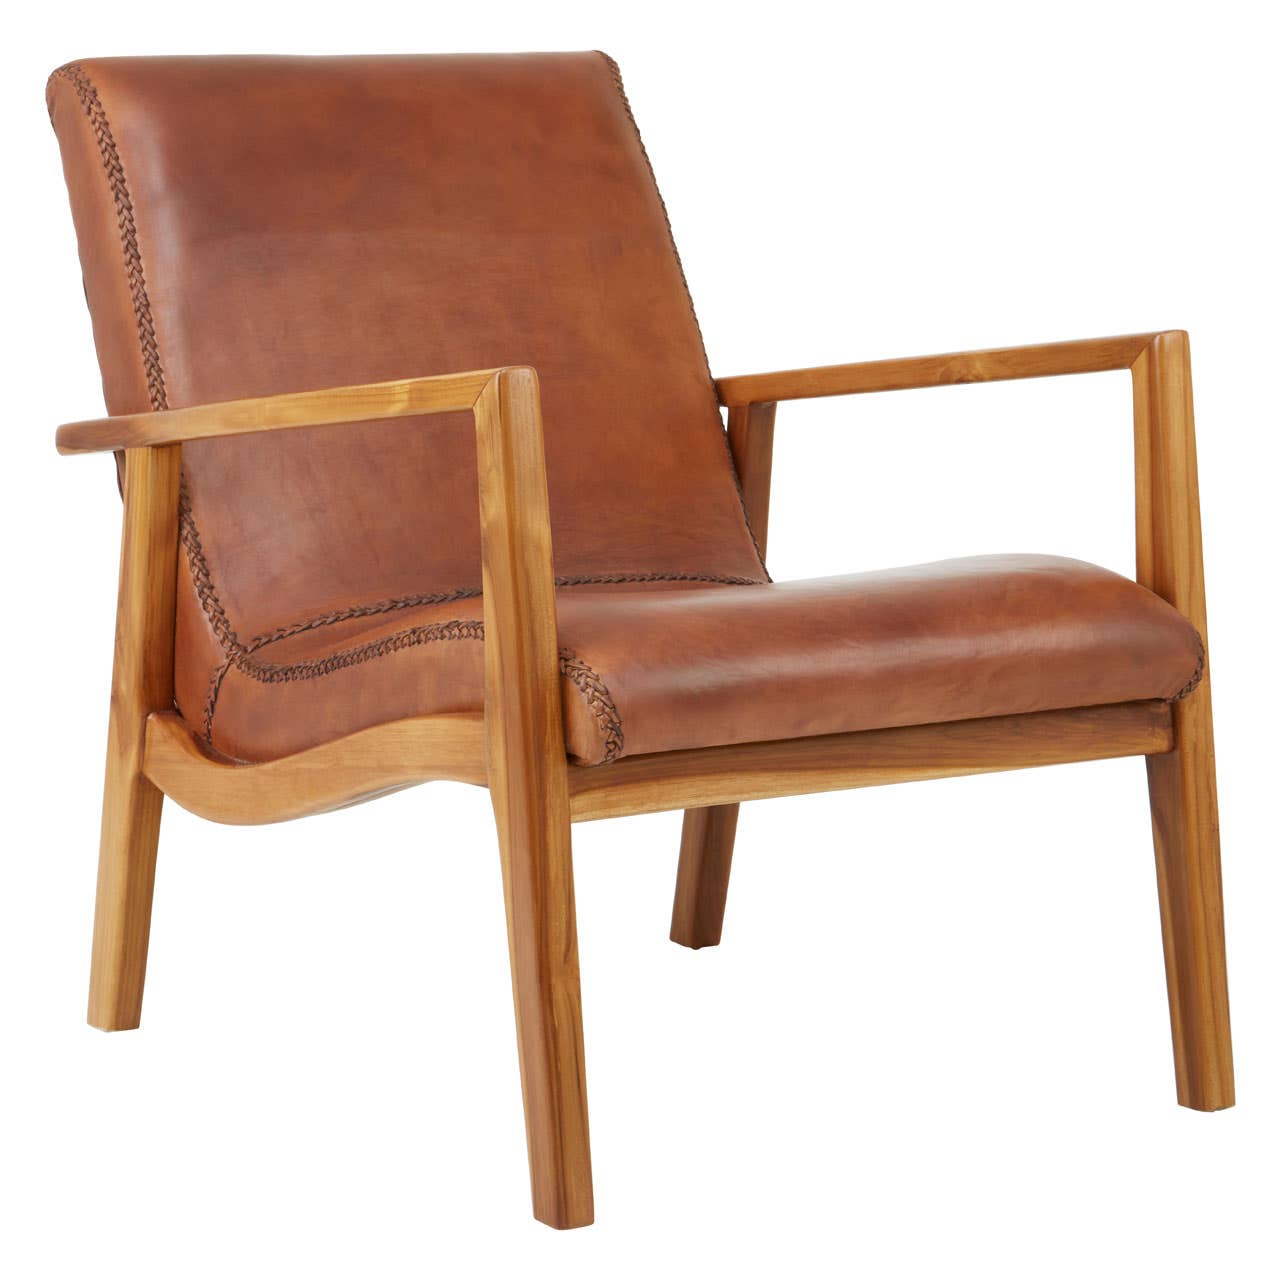 Kendari Brown Leather Curved Seat Chair